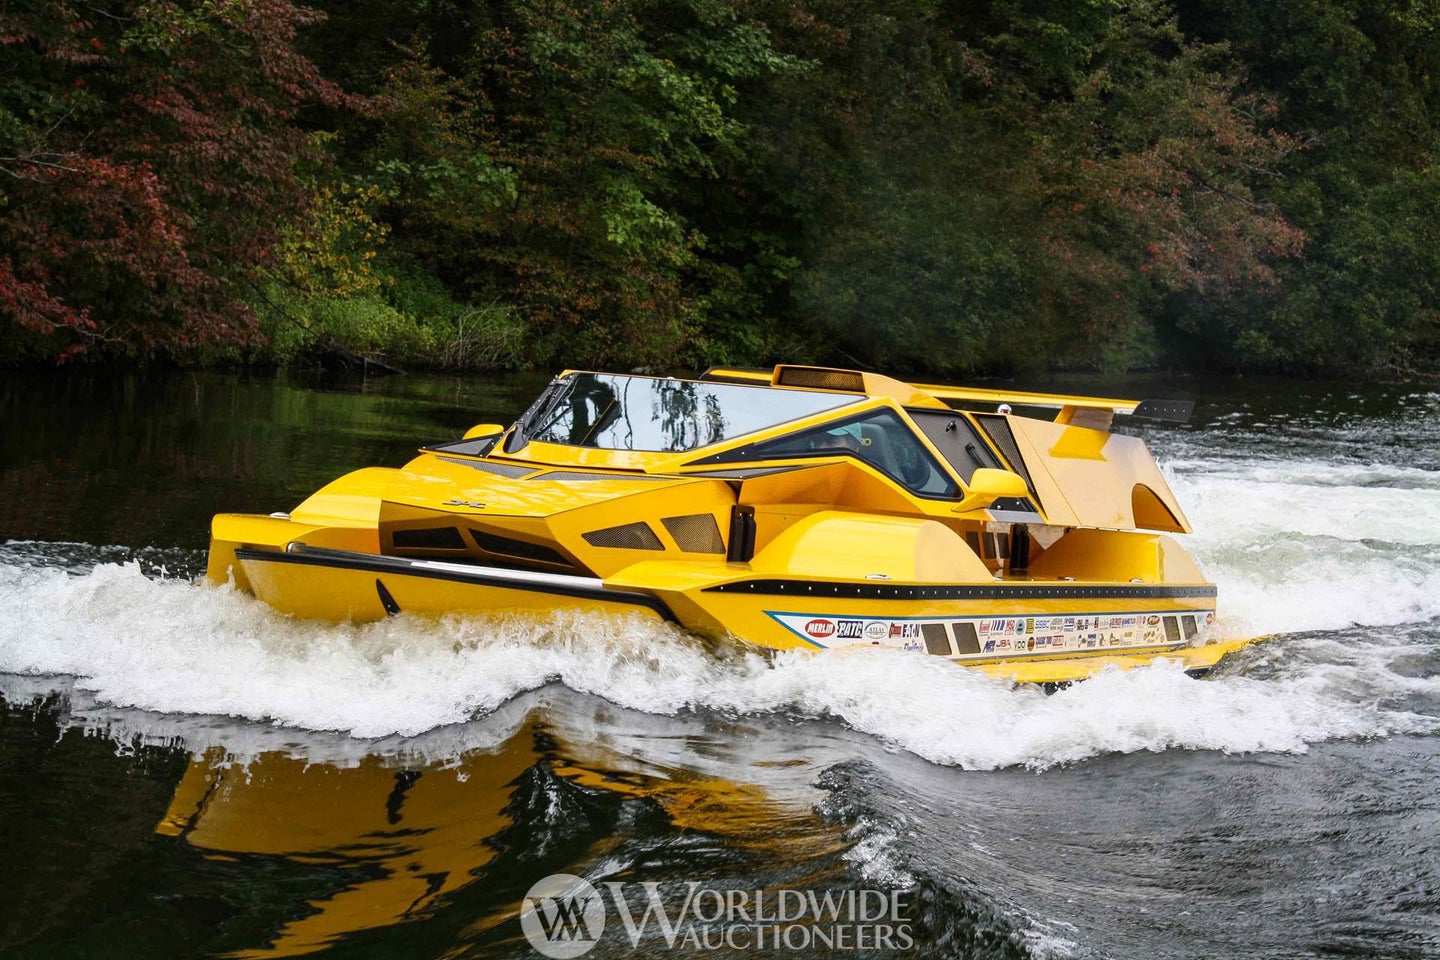 The 762 HP Hydrocar Could Be Your Ticket To Amphibious Adventure